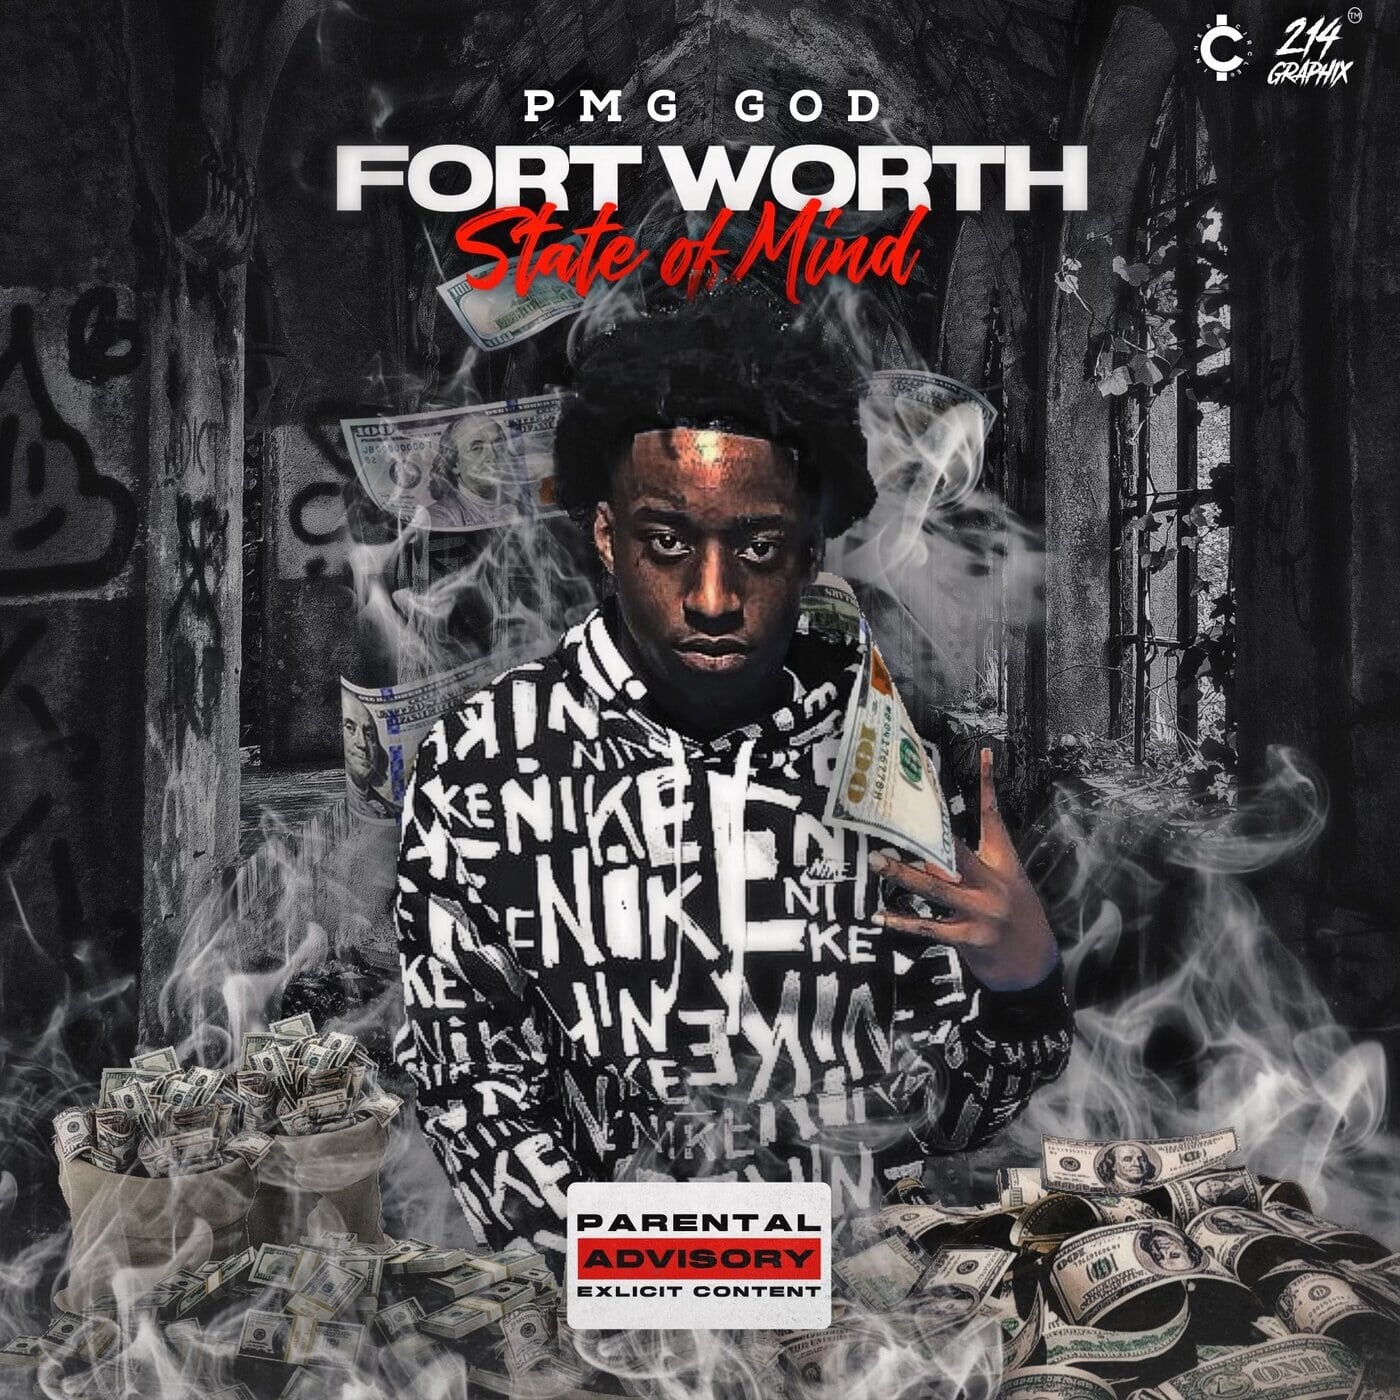 Fort Worth State of Mind by pmg God and OJ Da Juiceman on Beatsource